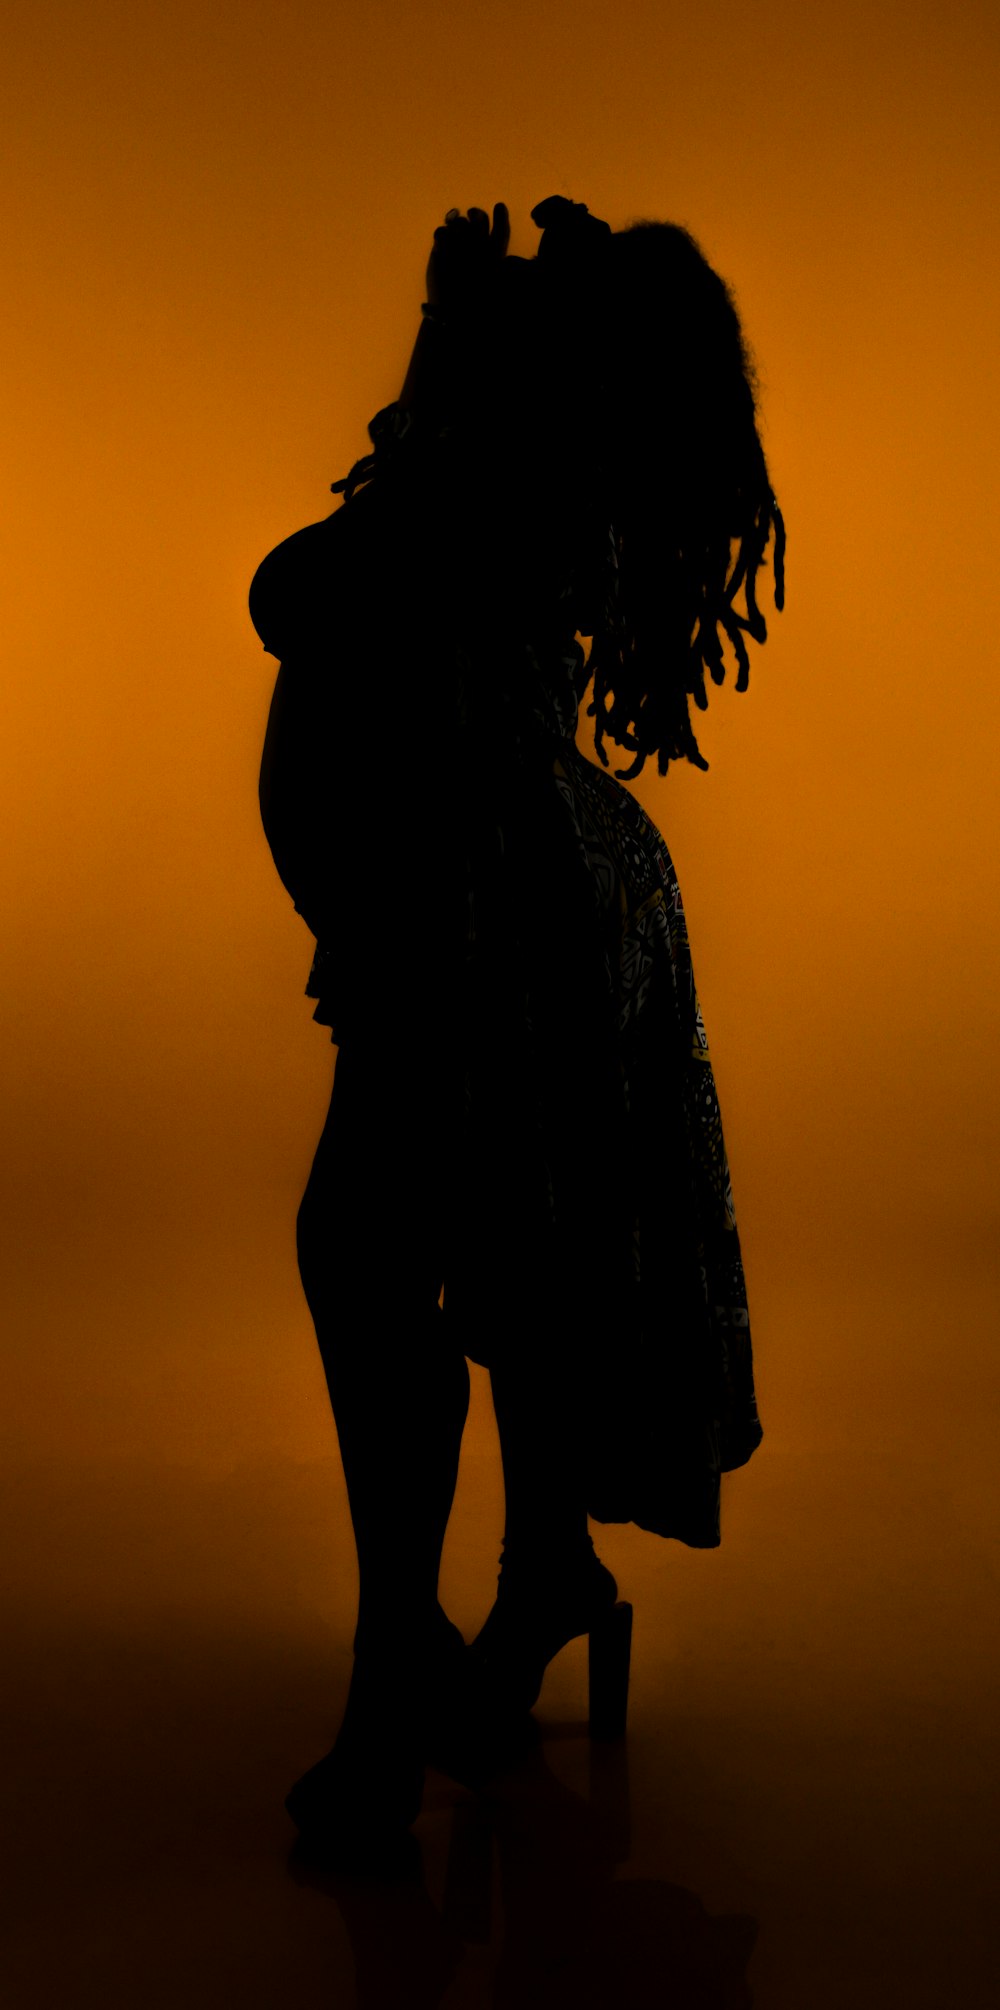 a silhouette of a woman kissing a man